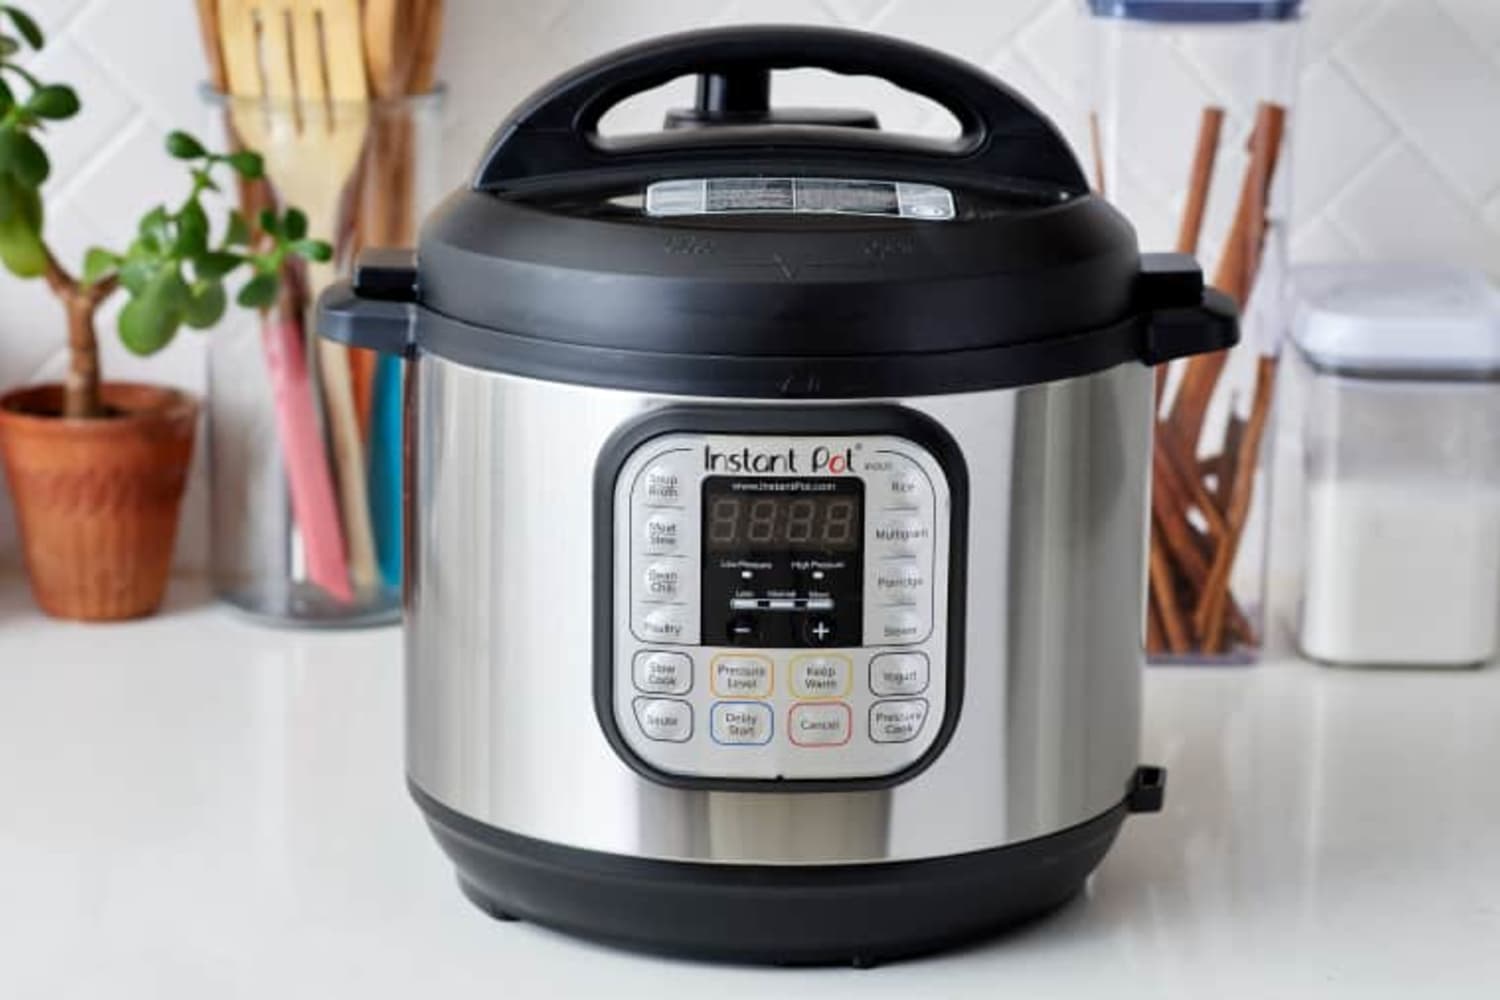 Instant Pot Review - Why I Love the Instant Pot DUO60 Multi-Cooker